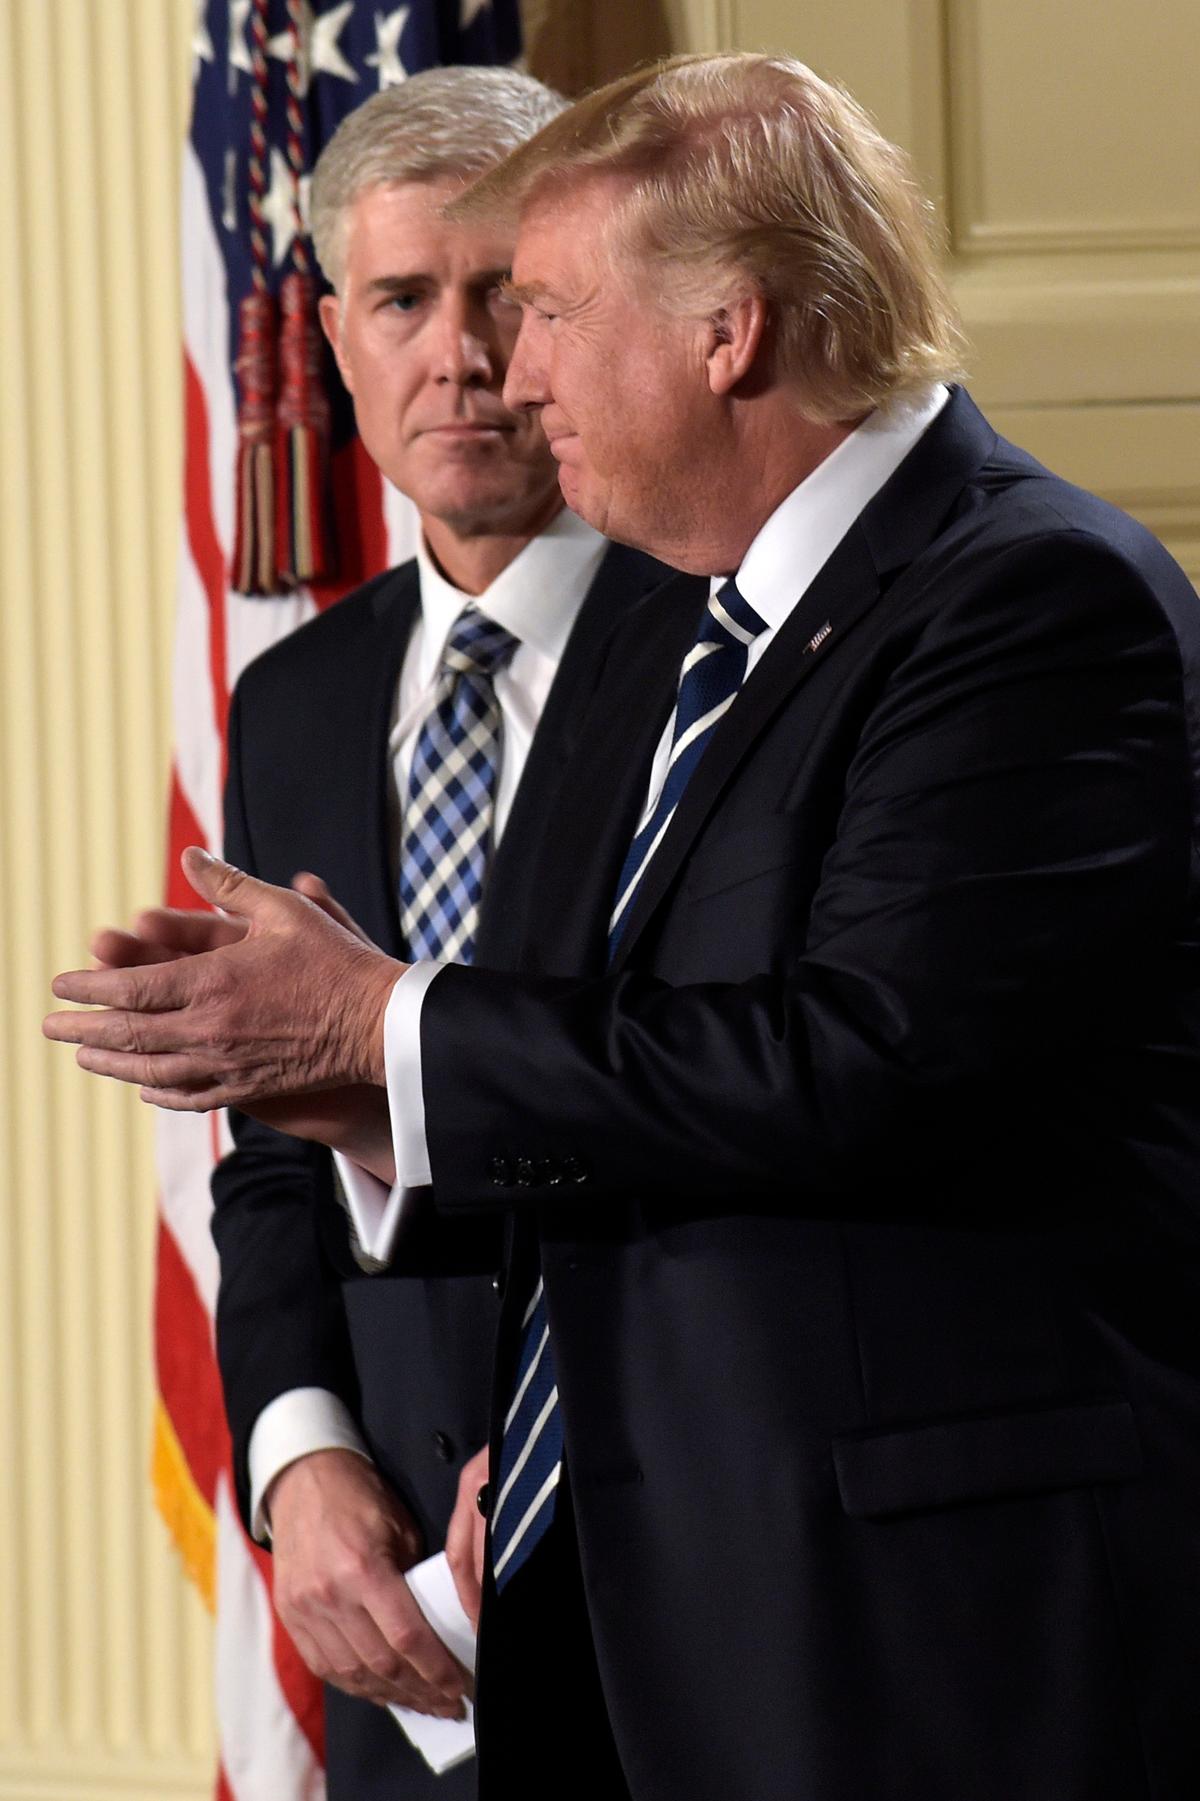 President Donald Trump and Judge Neil Gorsuch during a televised address from the East Room of the White House in Washington on Jan. 31, 2017. (AP Photo/Susan Walsh)